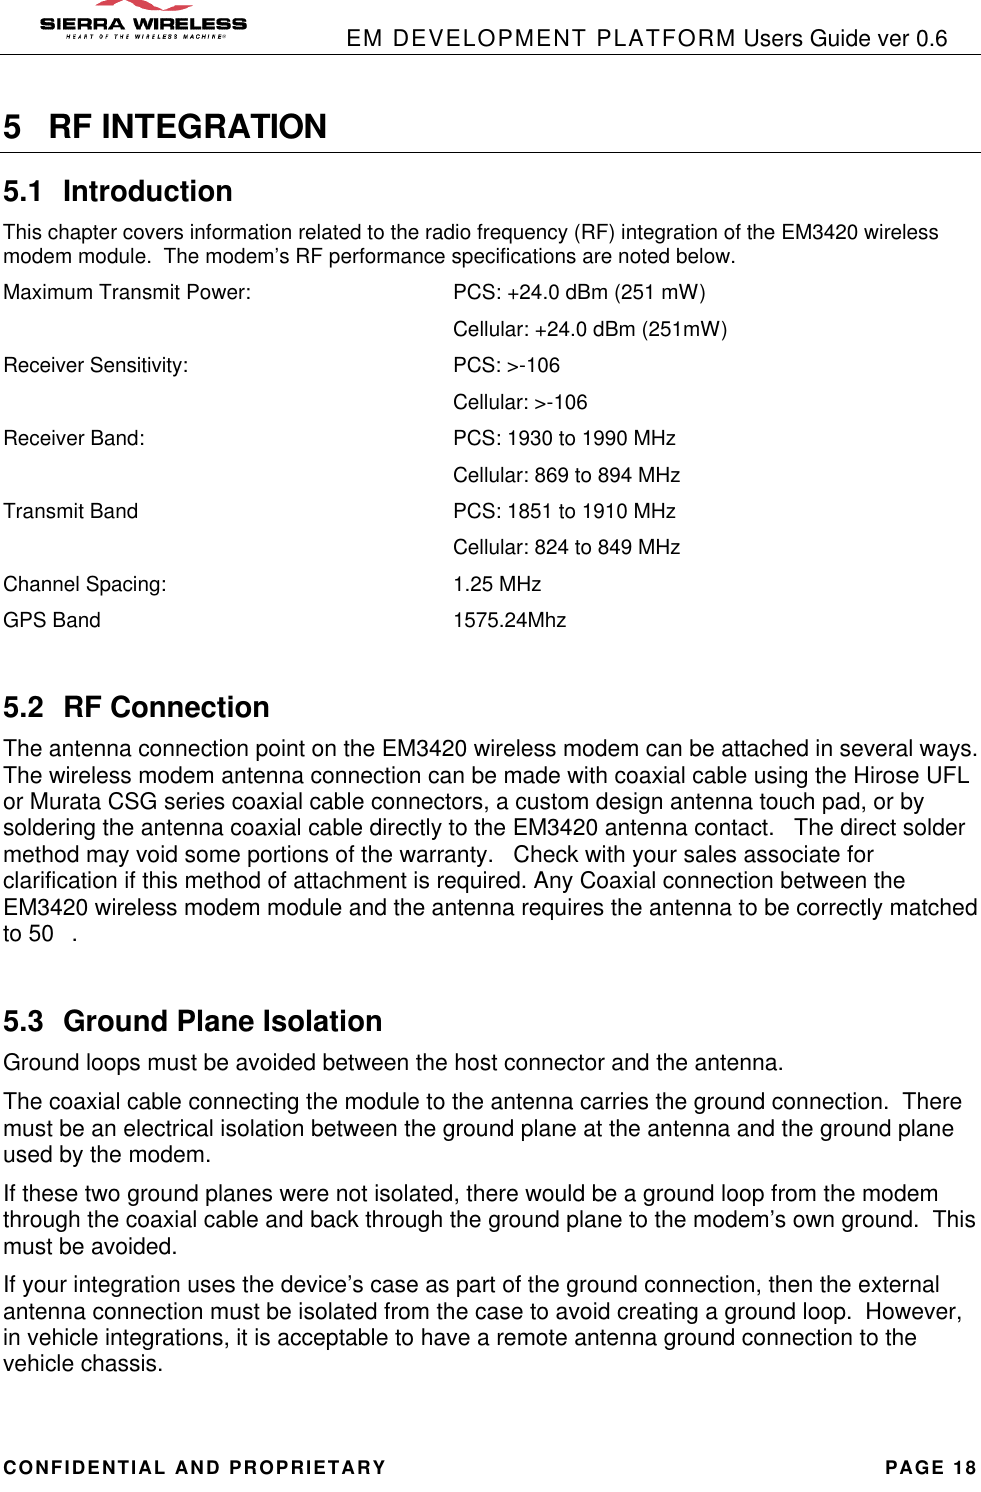            EM DEVELOPMENT PLATFORM Users Guide ver 0.6 CONFIDENTIAL AND PROPRIETARY PAGE 18 5 RF INTEGRATION 5.1 Introduction This chapter covers information related to the radio frequency (RF) integration of the EM3420 wireless modem module.  The modem’s RF performance specifications are noted below. Maximum Transmit Power:   PCS: +24.0 dBm (251 mW)       Cellular: +24.0 dBm (251mW) Receiver Sensitivity:    PCS: &gt;-106       Cellular: &gt;-106 Receiver Band:     PCS: 1930 to 1990 MHz       Cellular: 869 to 894 MHz Transmit Band     PCS: 1851 to 1910 MHz       Cellular: 824 to 849 MHz Channel Spacing:    1.25 MHz GPS Band     1575.24Mhz  5.2 RF Connection The antenna connection point on the EM3420 wireless modem can be attached in several ways.  The wireless modem antenna connection can be made with coaxial cable using the Hirose UFL or Murata CSG series coaxial cable connectors, a custom design antenna touch pad, or by soldering the antenna coaxial cable directly to the EM3420 antenna contact.   The direct solder method may void some portions of the warranty.   Check with your sales associate for clarification if this method of attachment is required. Any Coaxial connection between the EM3420 wireless modem module and the antenna requires the antenna to be correctly matched to 50.  5.3 Ground Plane Isolation Ground loops must be avoided between the host connector and the antenna. The coaxial cable connecting the module to the antenna carries the ground connection.  There must be an electrical isolation between the ground plane at the antenna and the ground plane used by the modem. If these two ground planes were not isolated, there would be a ground loop from the modem through the coaxial cable and back through the ground plane to the modem’s own ground.  This must be avoided. If your integration uses the device’s case as part of the ground connection, then the external antenna connection must be isolated from the case to avoid creating a ground loop.  However, in vehicle integrations, it is acceptable to have a remote antenna ground connection to the vehicle chassis.  